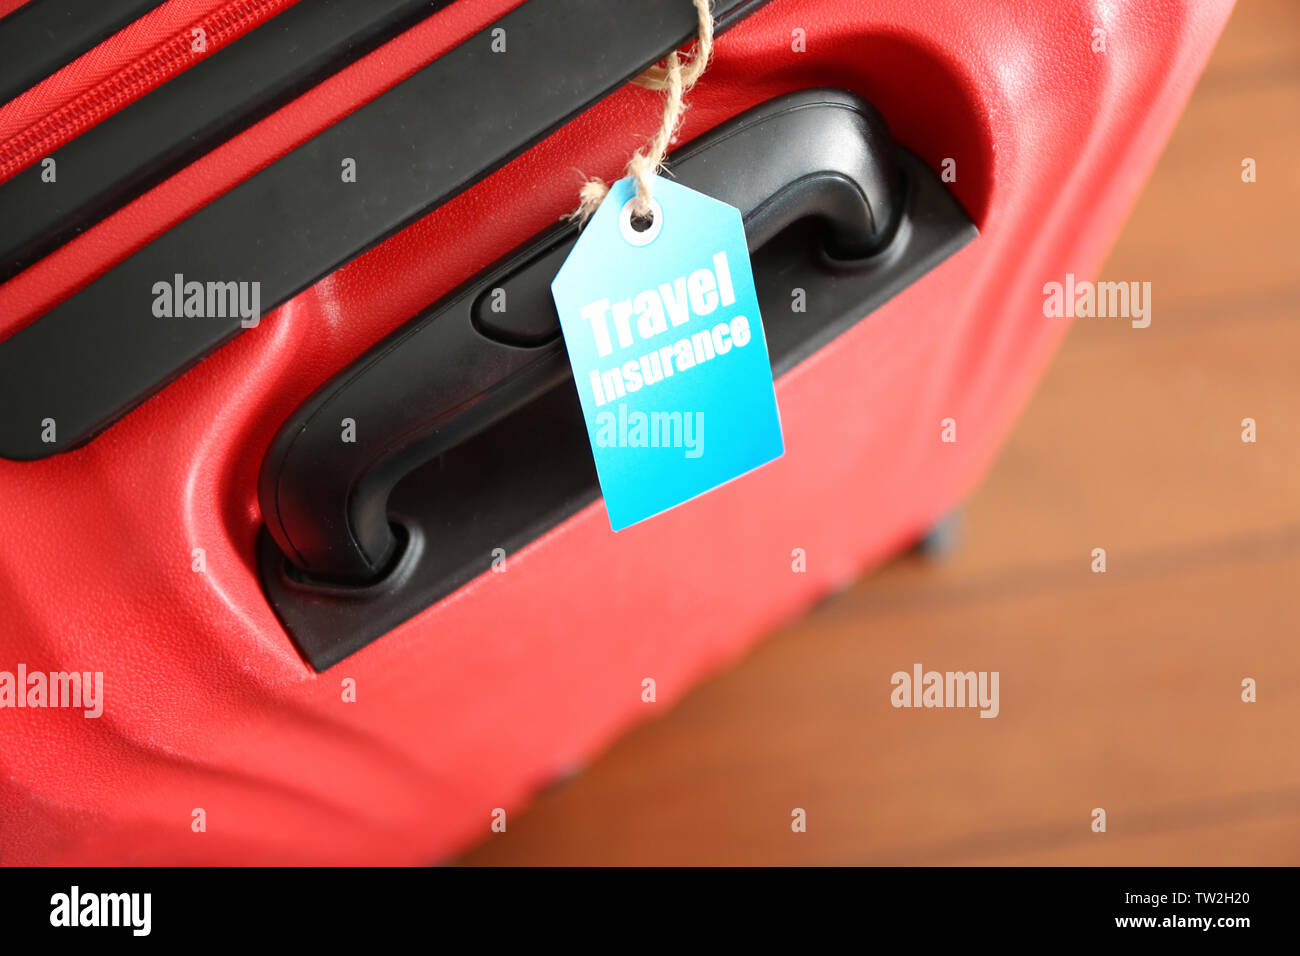 Red suitcase with label, closeup. TRAVEL INSURANCE concept Stock Photo